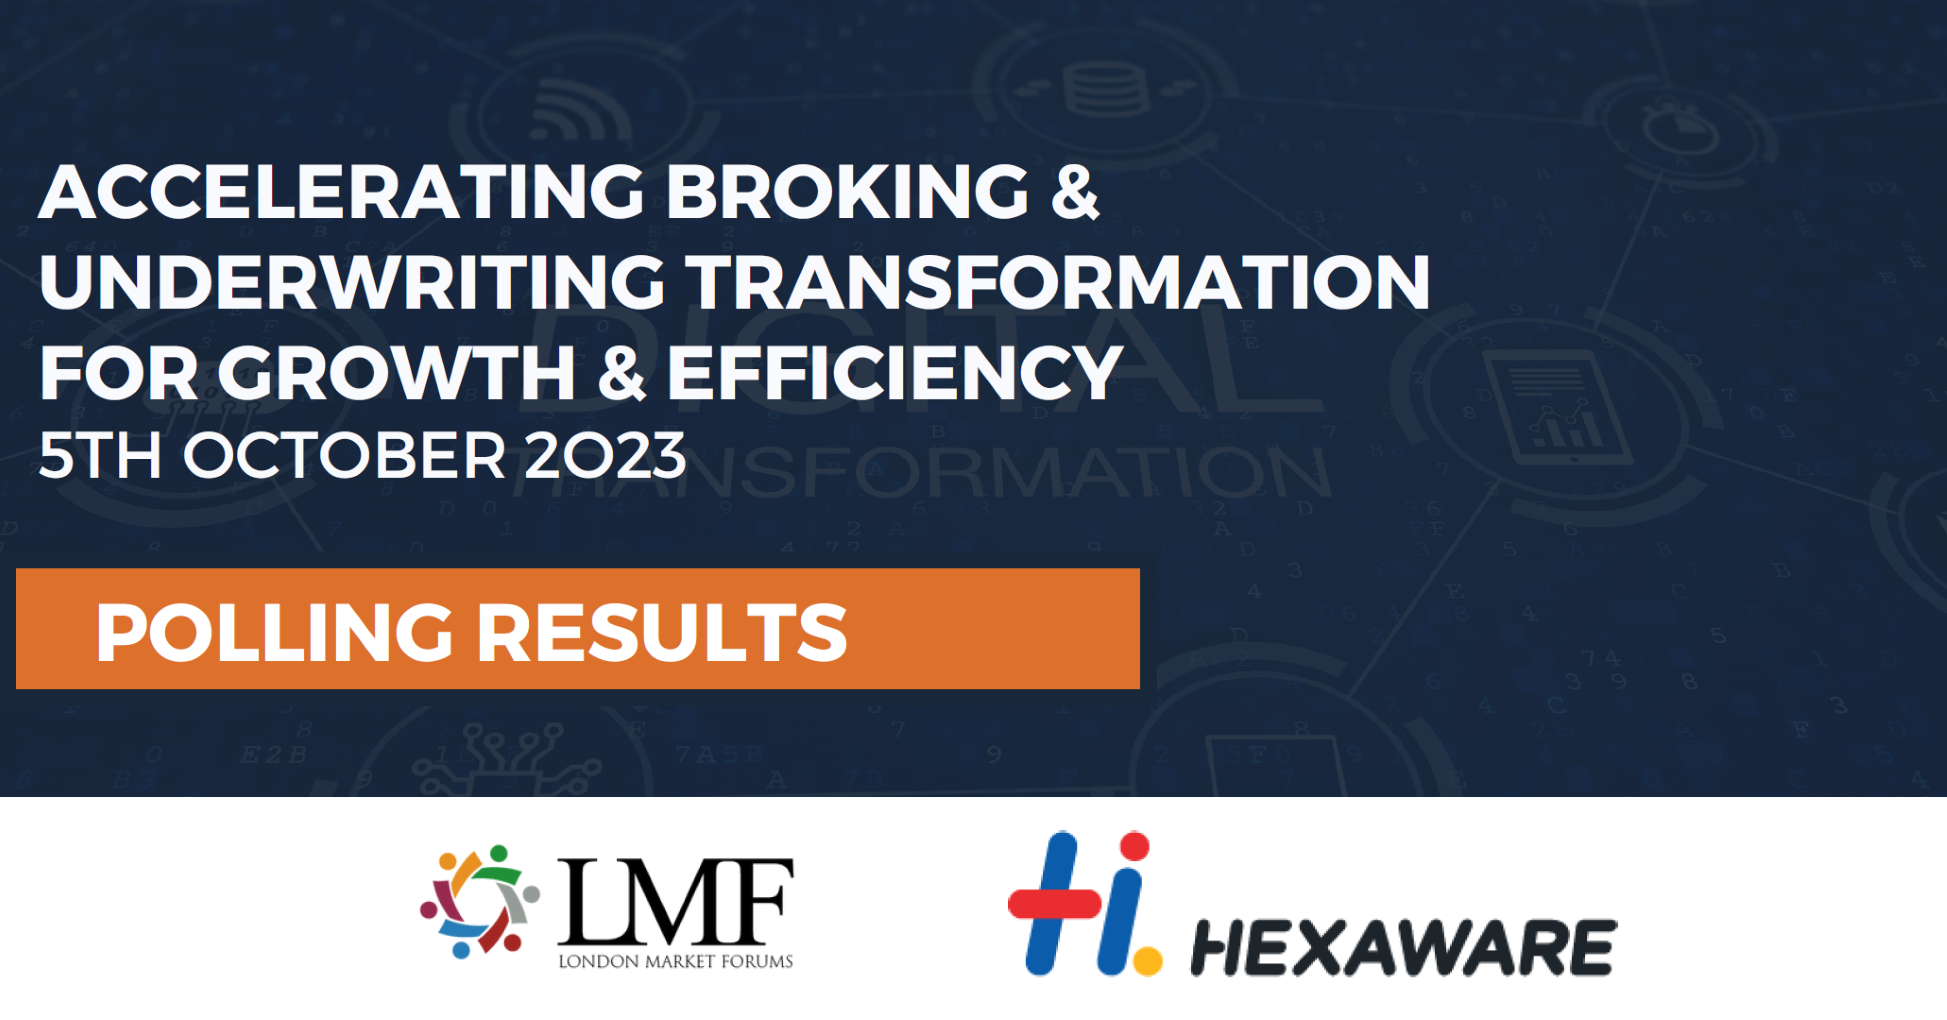 Accelerating Broking and Underwriting Transformation - Polling Results